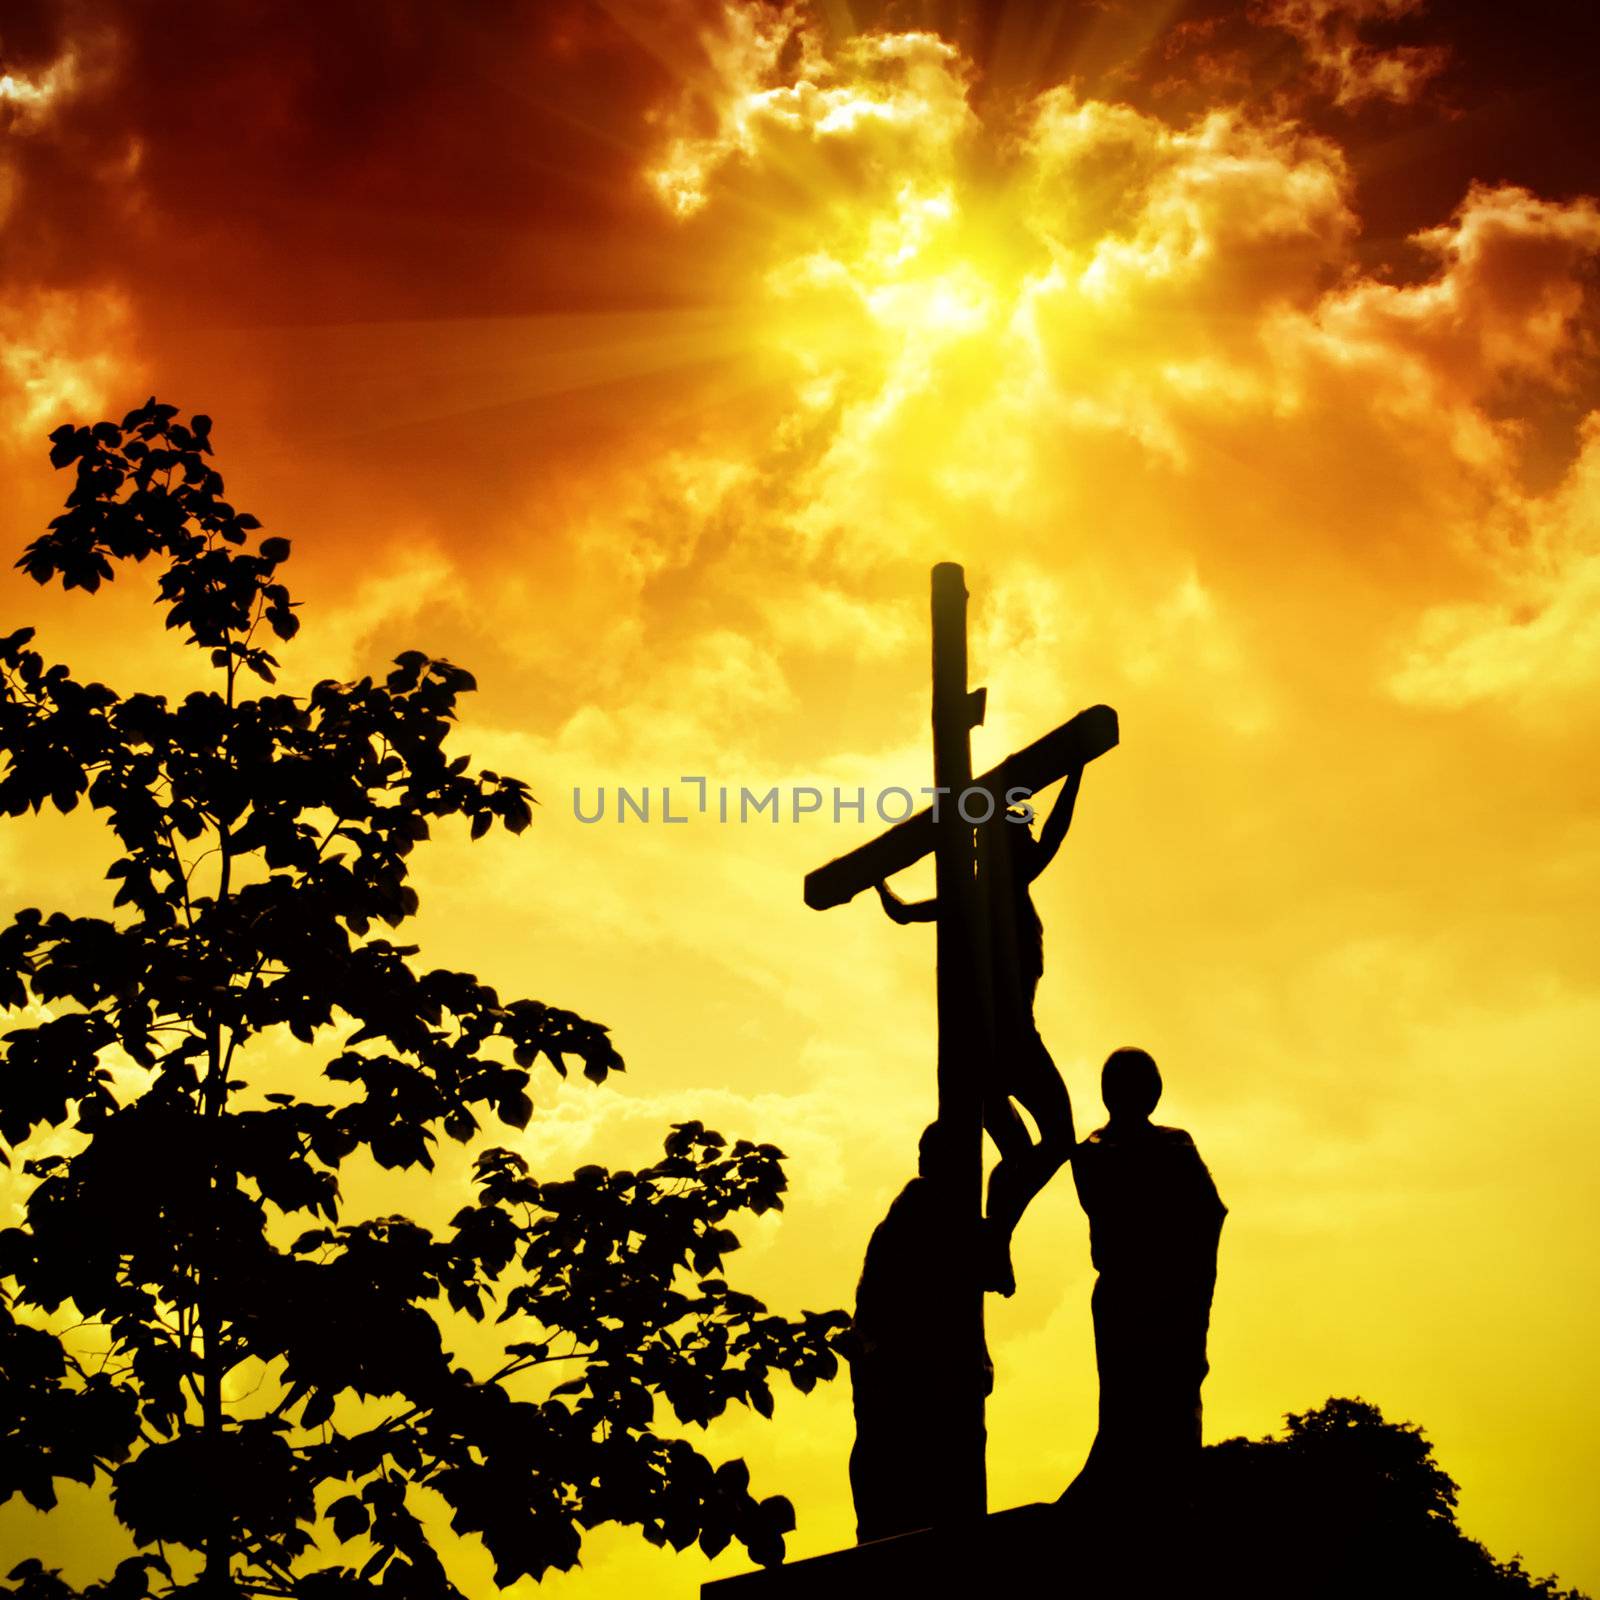 Crucifixion of Jesus Christ with dramatic sky in background